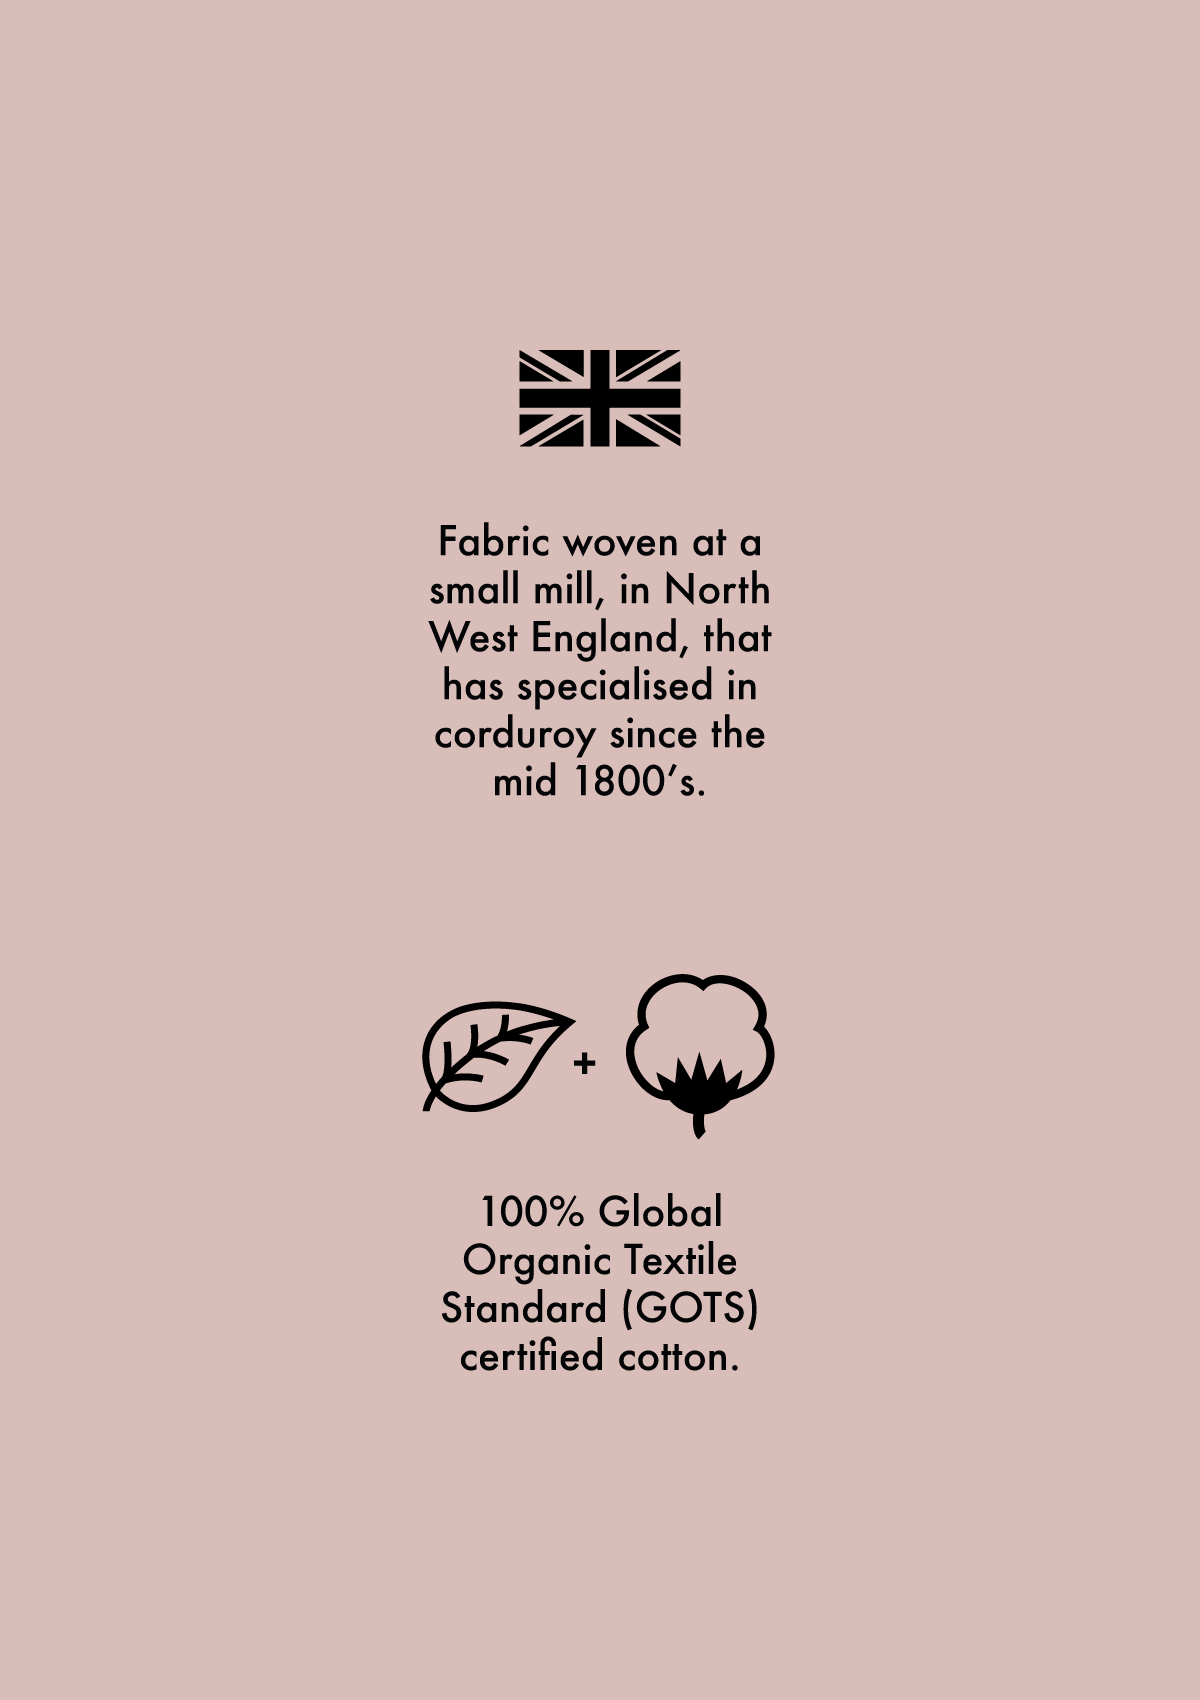 A Union Jack symbol to show the fabric is woven in the North West of England that has been making corduroy since the 1800s. A leaf and cotton plant symbol to explain that the fabric is 100% Global Organic Standard certified organic cotton.